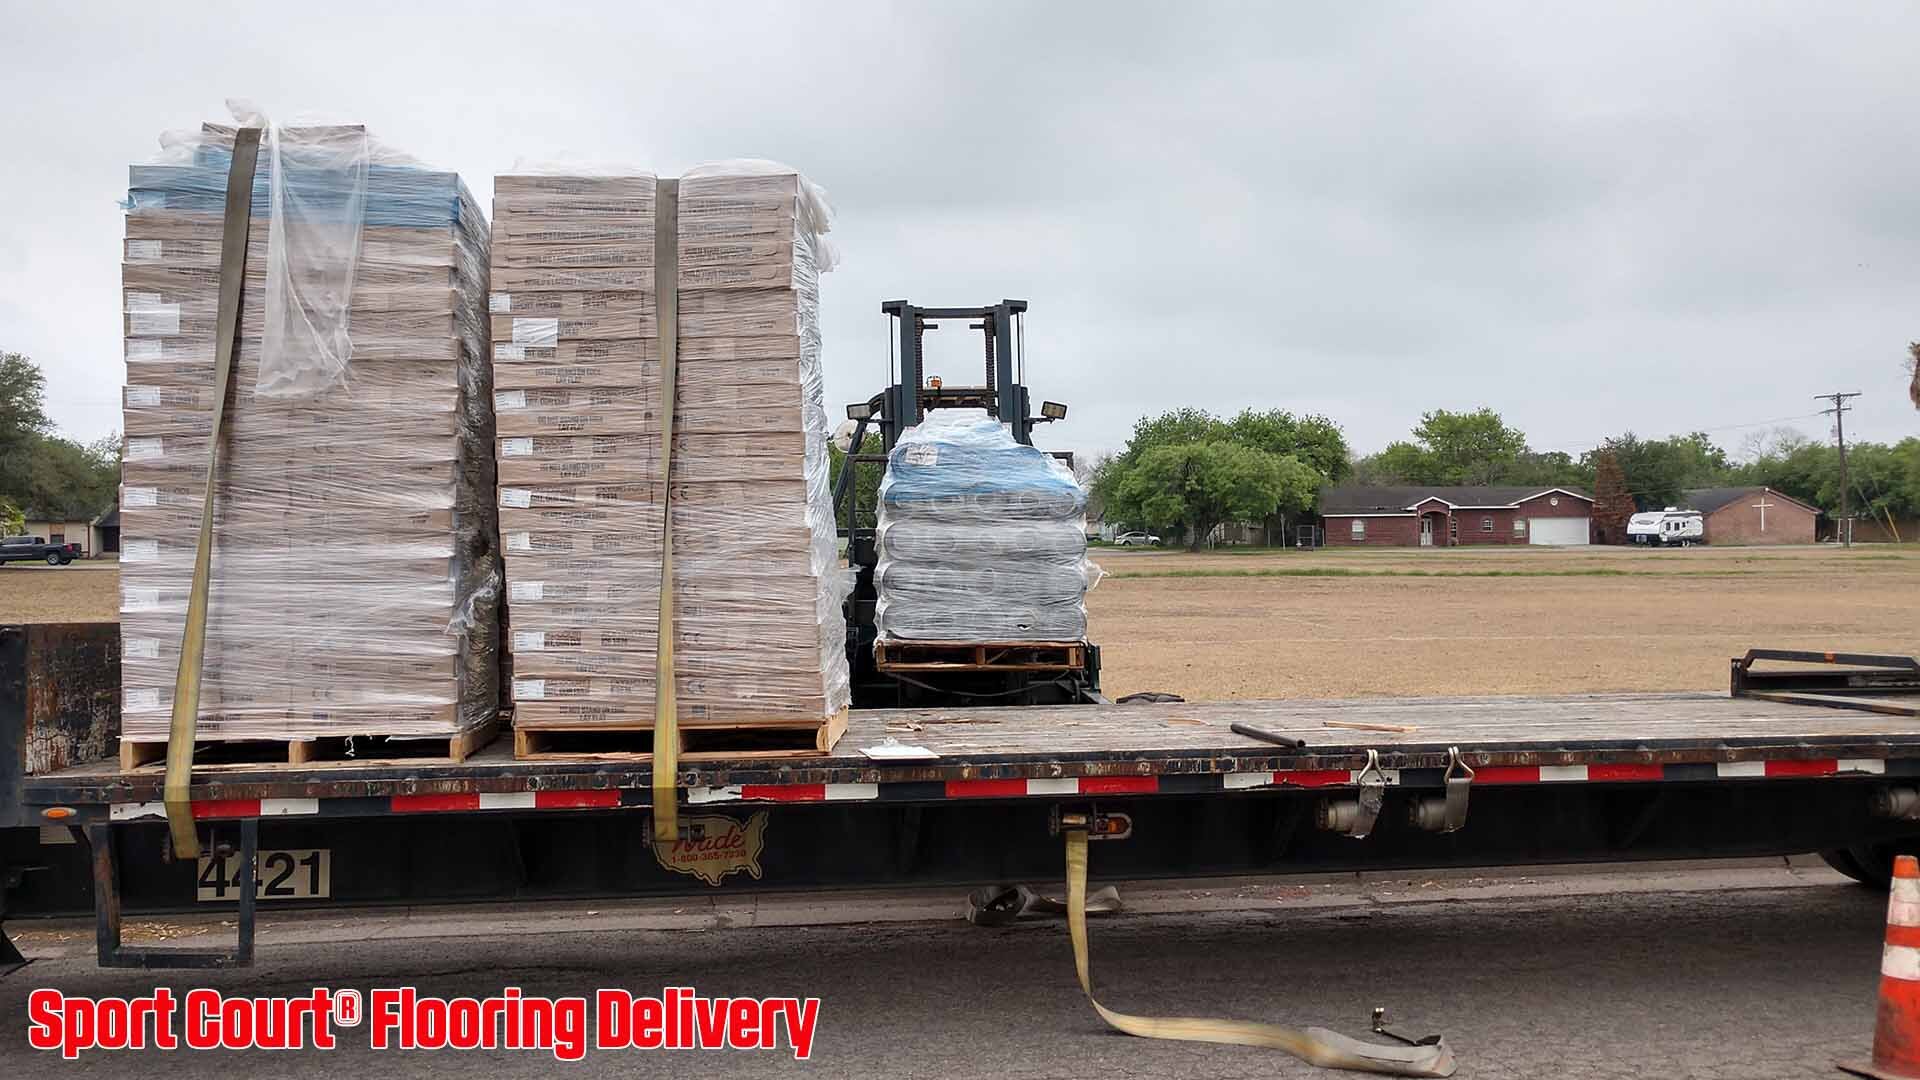 Unloading flooring at the Boys and Girls Club of Kingsville